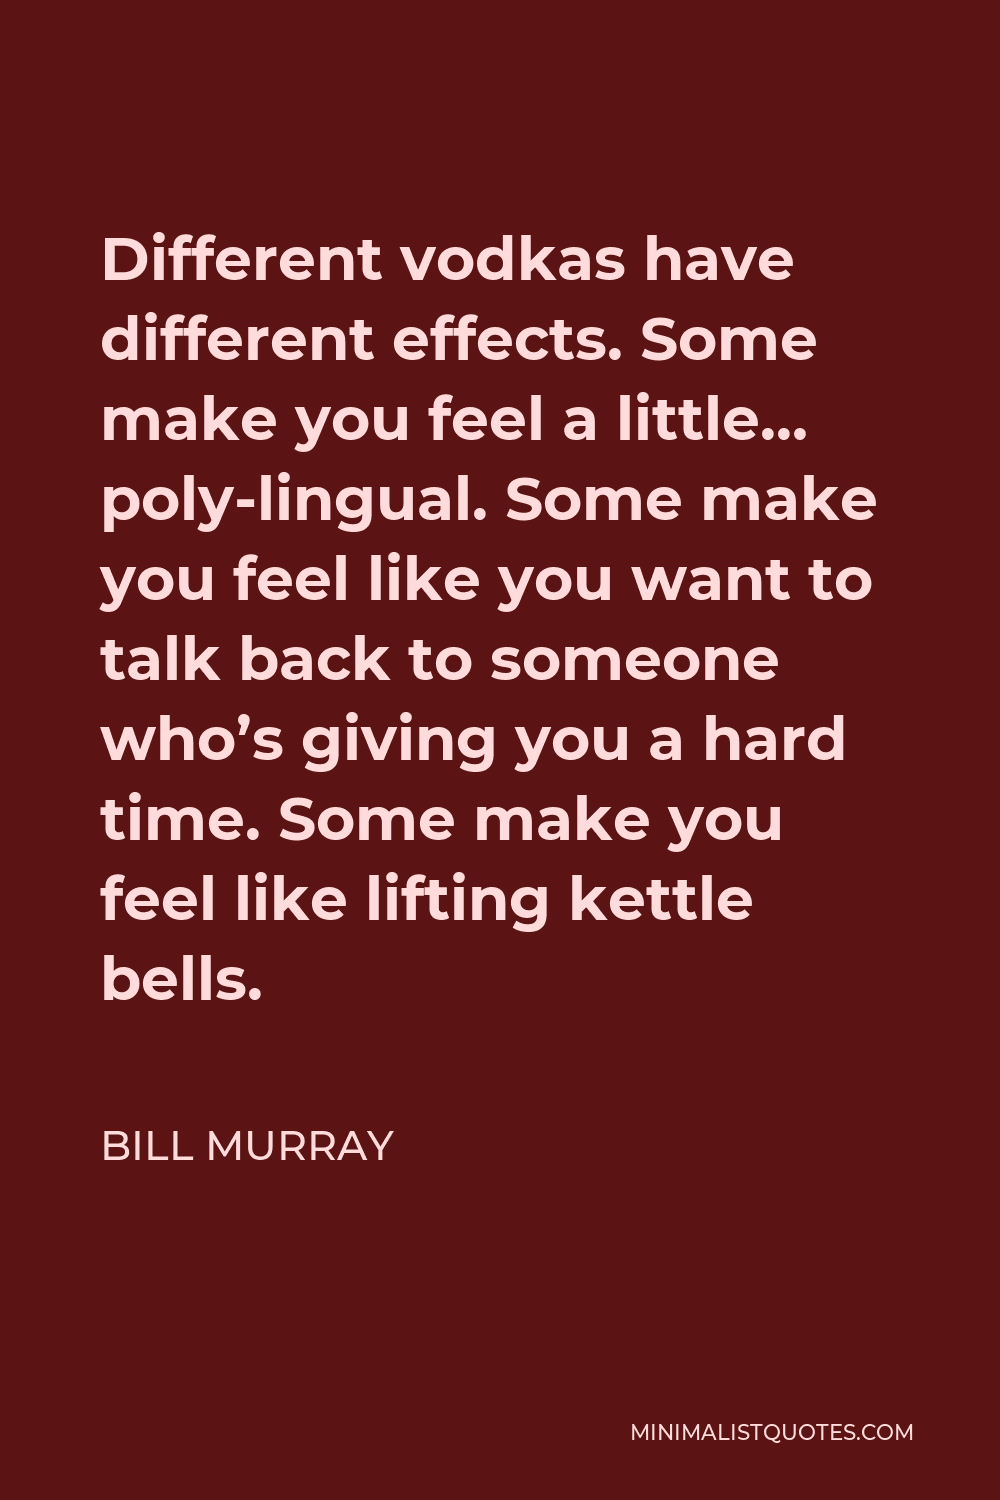 Bill Murray Quote - Different vodkas have different effects. Some make you feel a little… poly-lingual. Some make you feel like you want to talk back to someone who’s giving you a hard time. Some make you feel like lifting kettle bells.